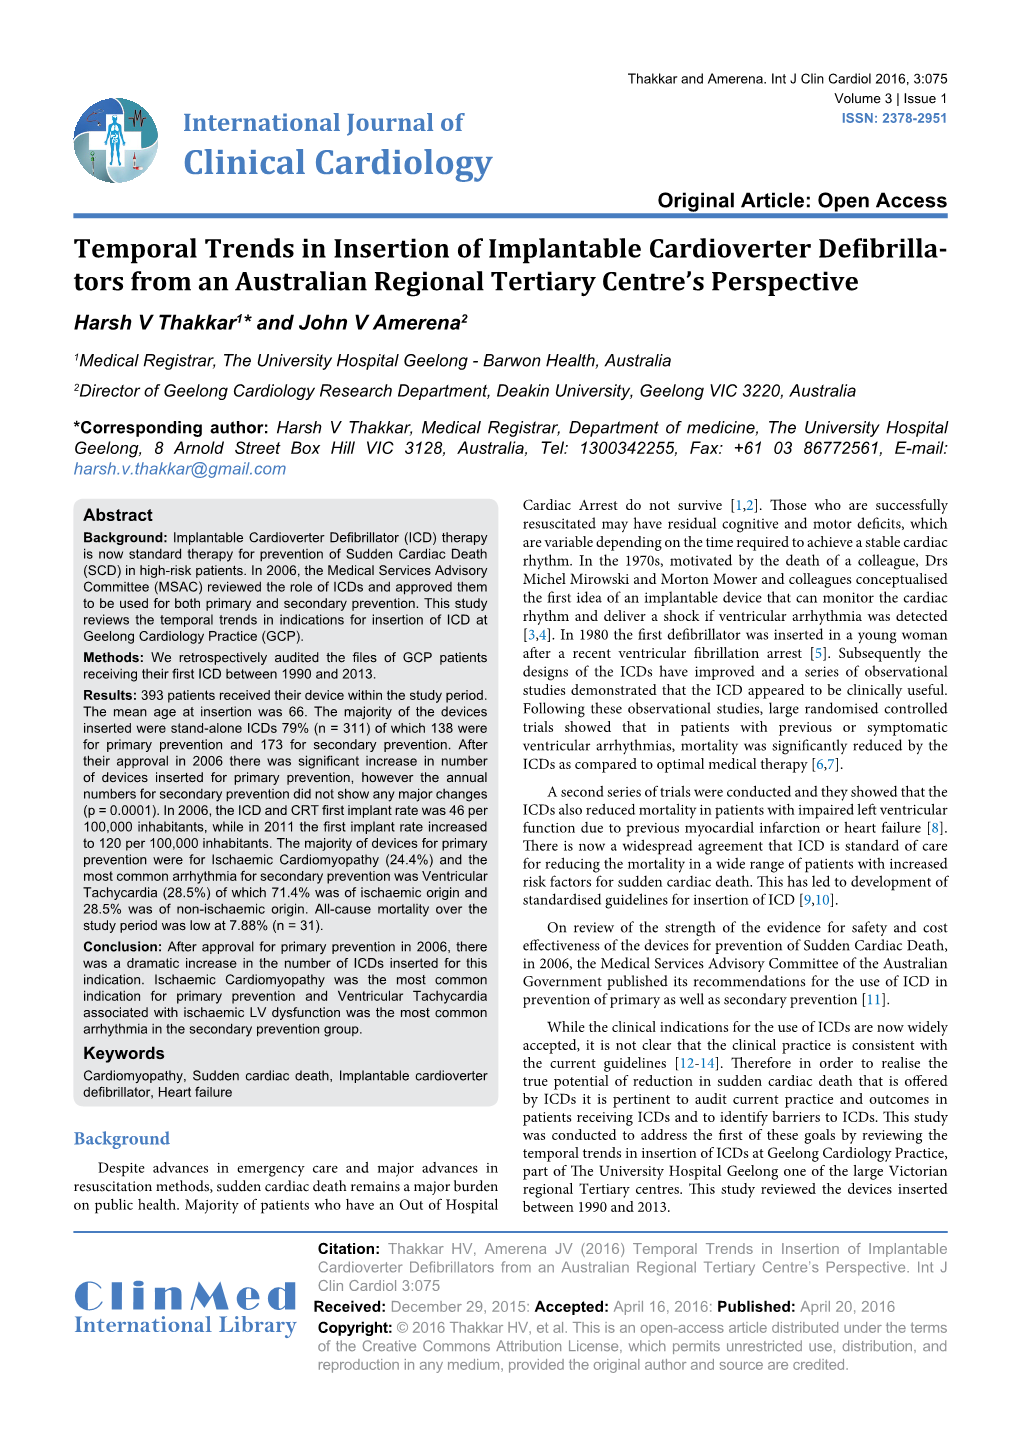 Temporal Trends in Insertion of Implantable Cardioverter